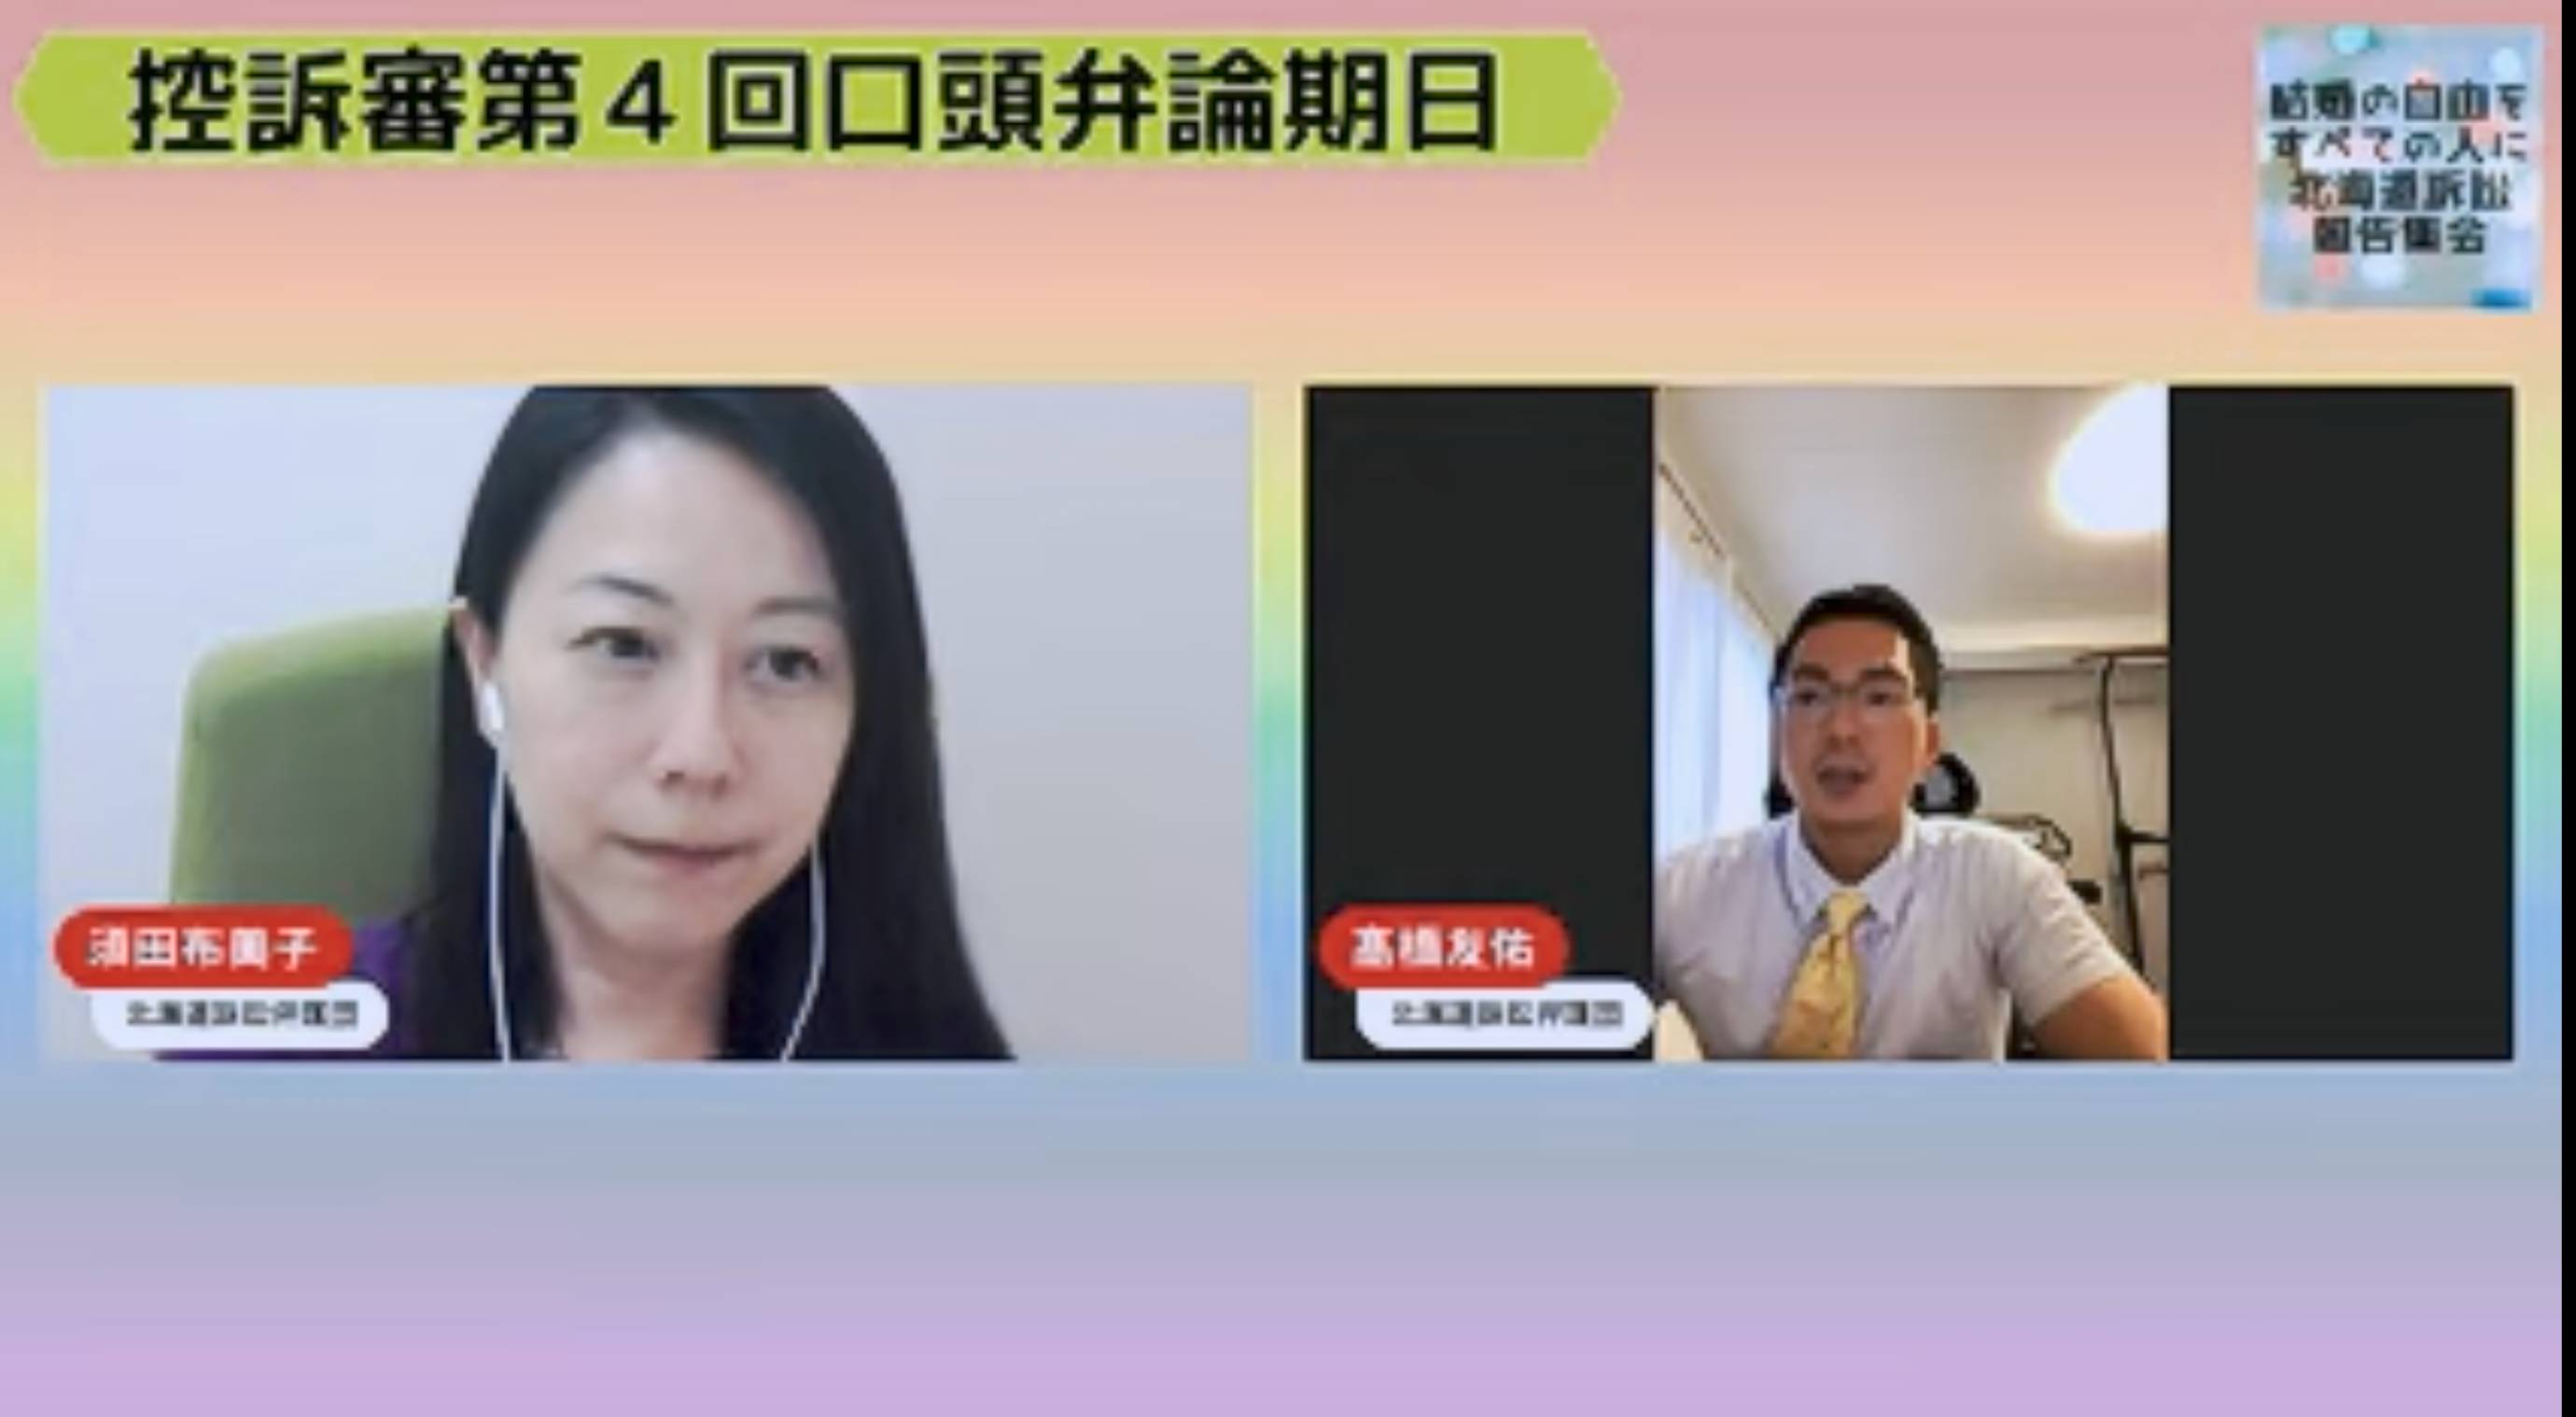 Lawyer Fumiko Suda, who is the moderator, and lawyer Yusuke Takahashi, who is reporting the date, are pictured.